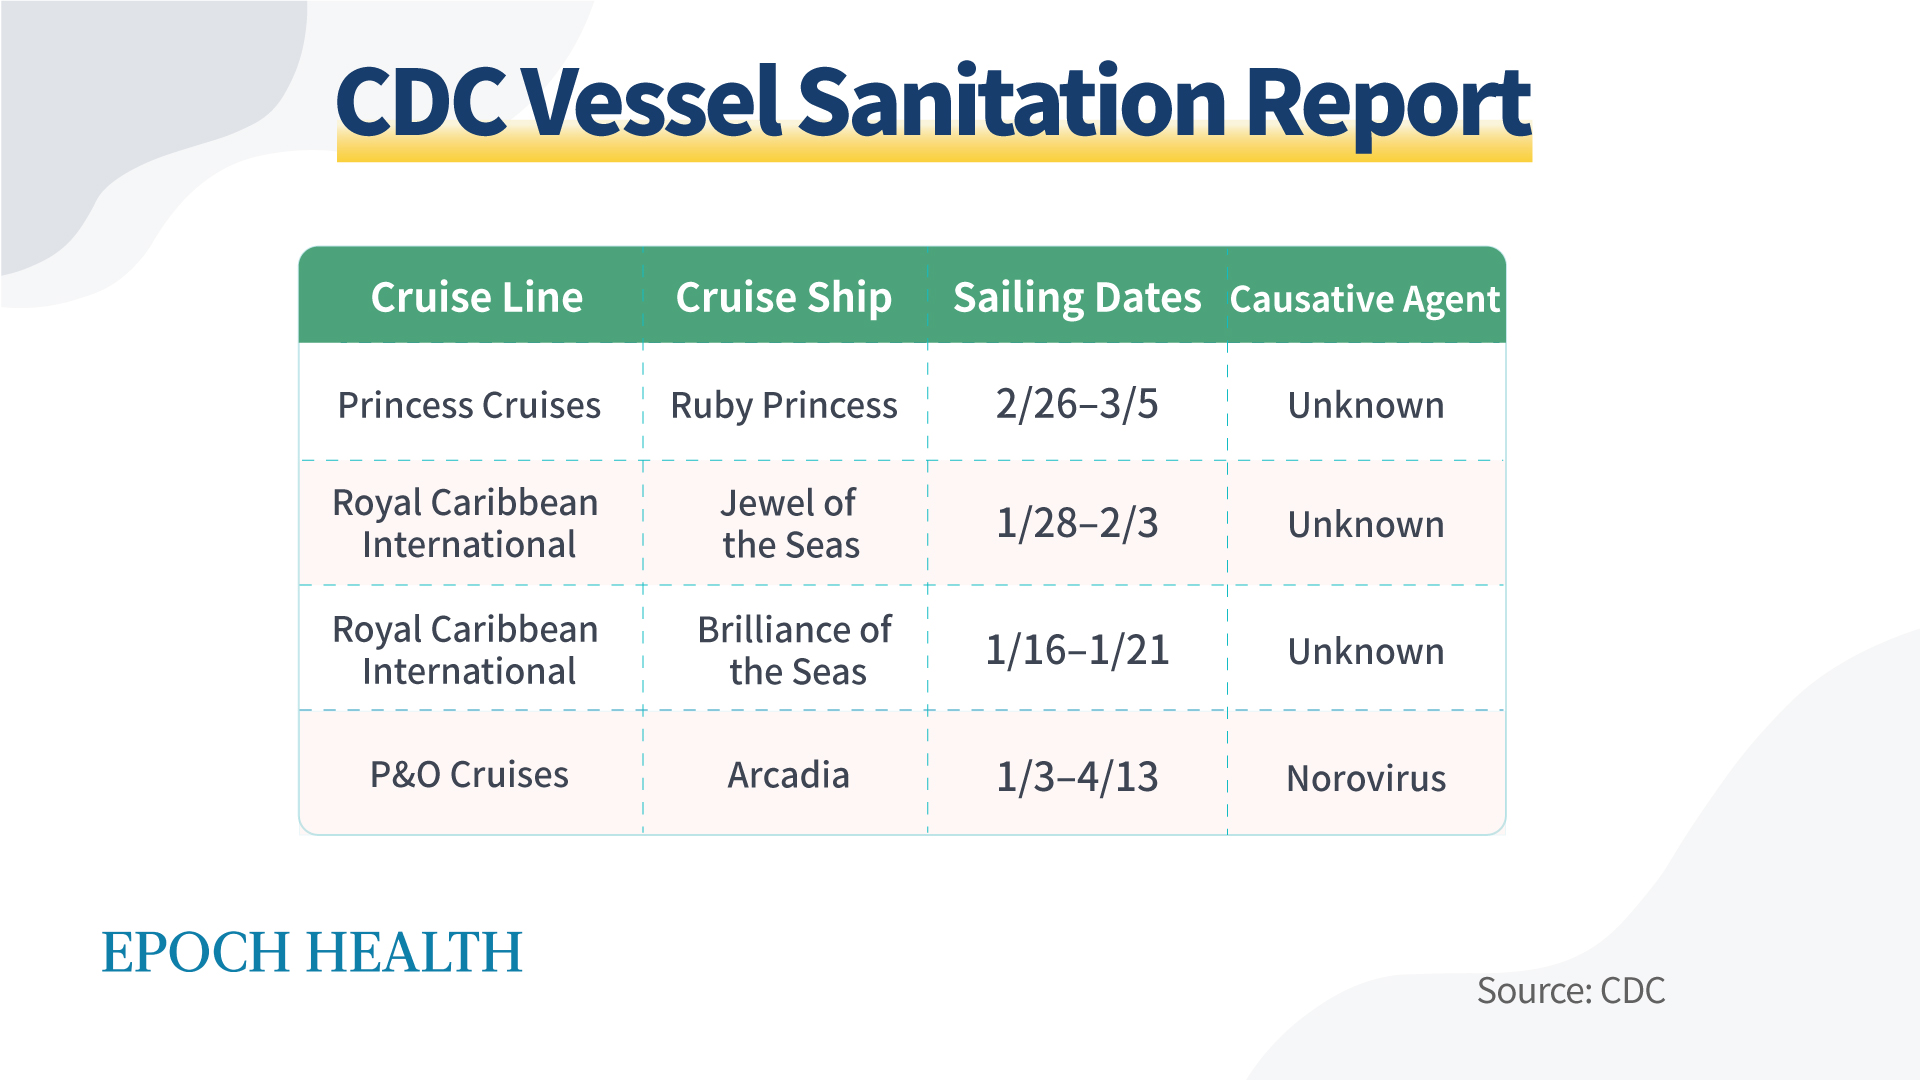 The Culprit Behind The Cruise Ship Outbreaks Norovirus 